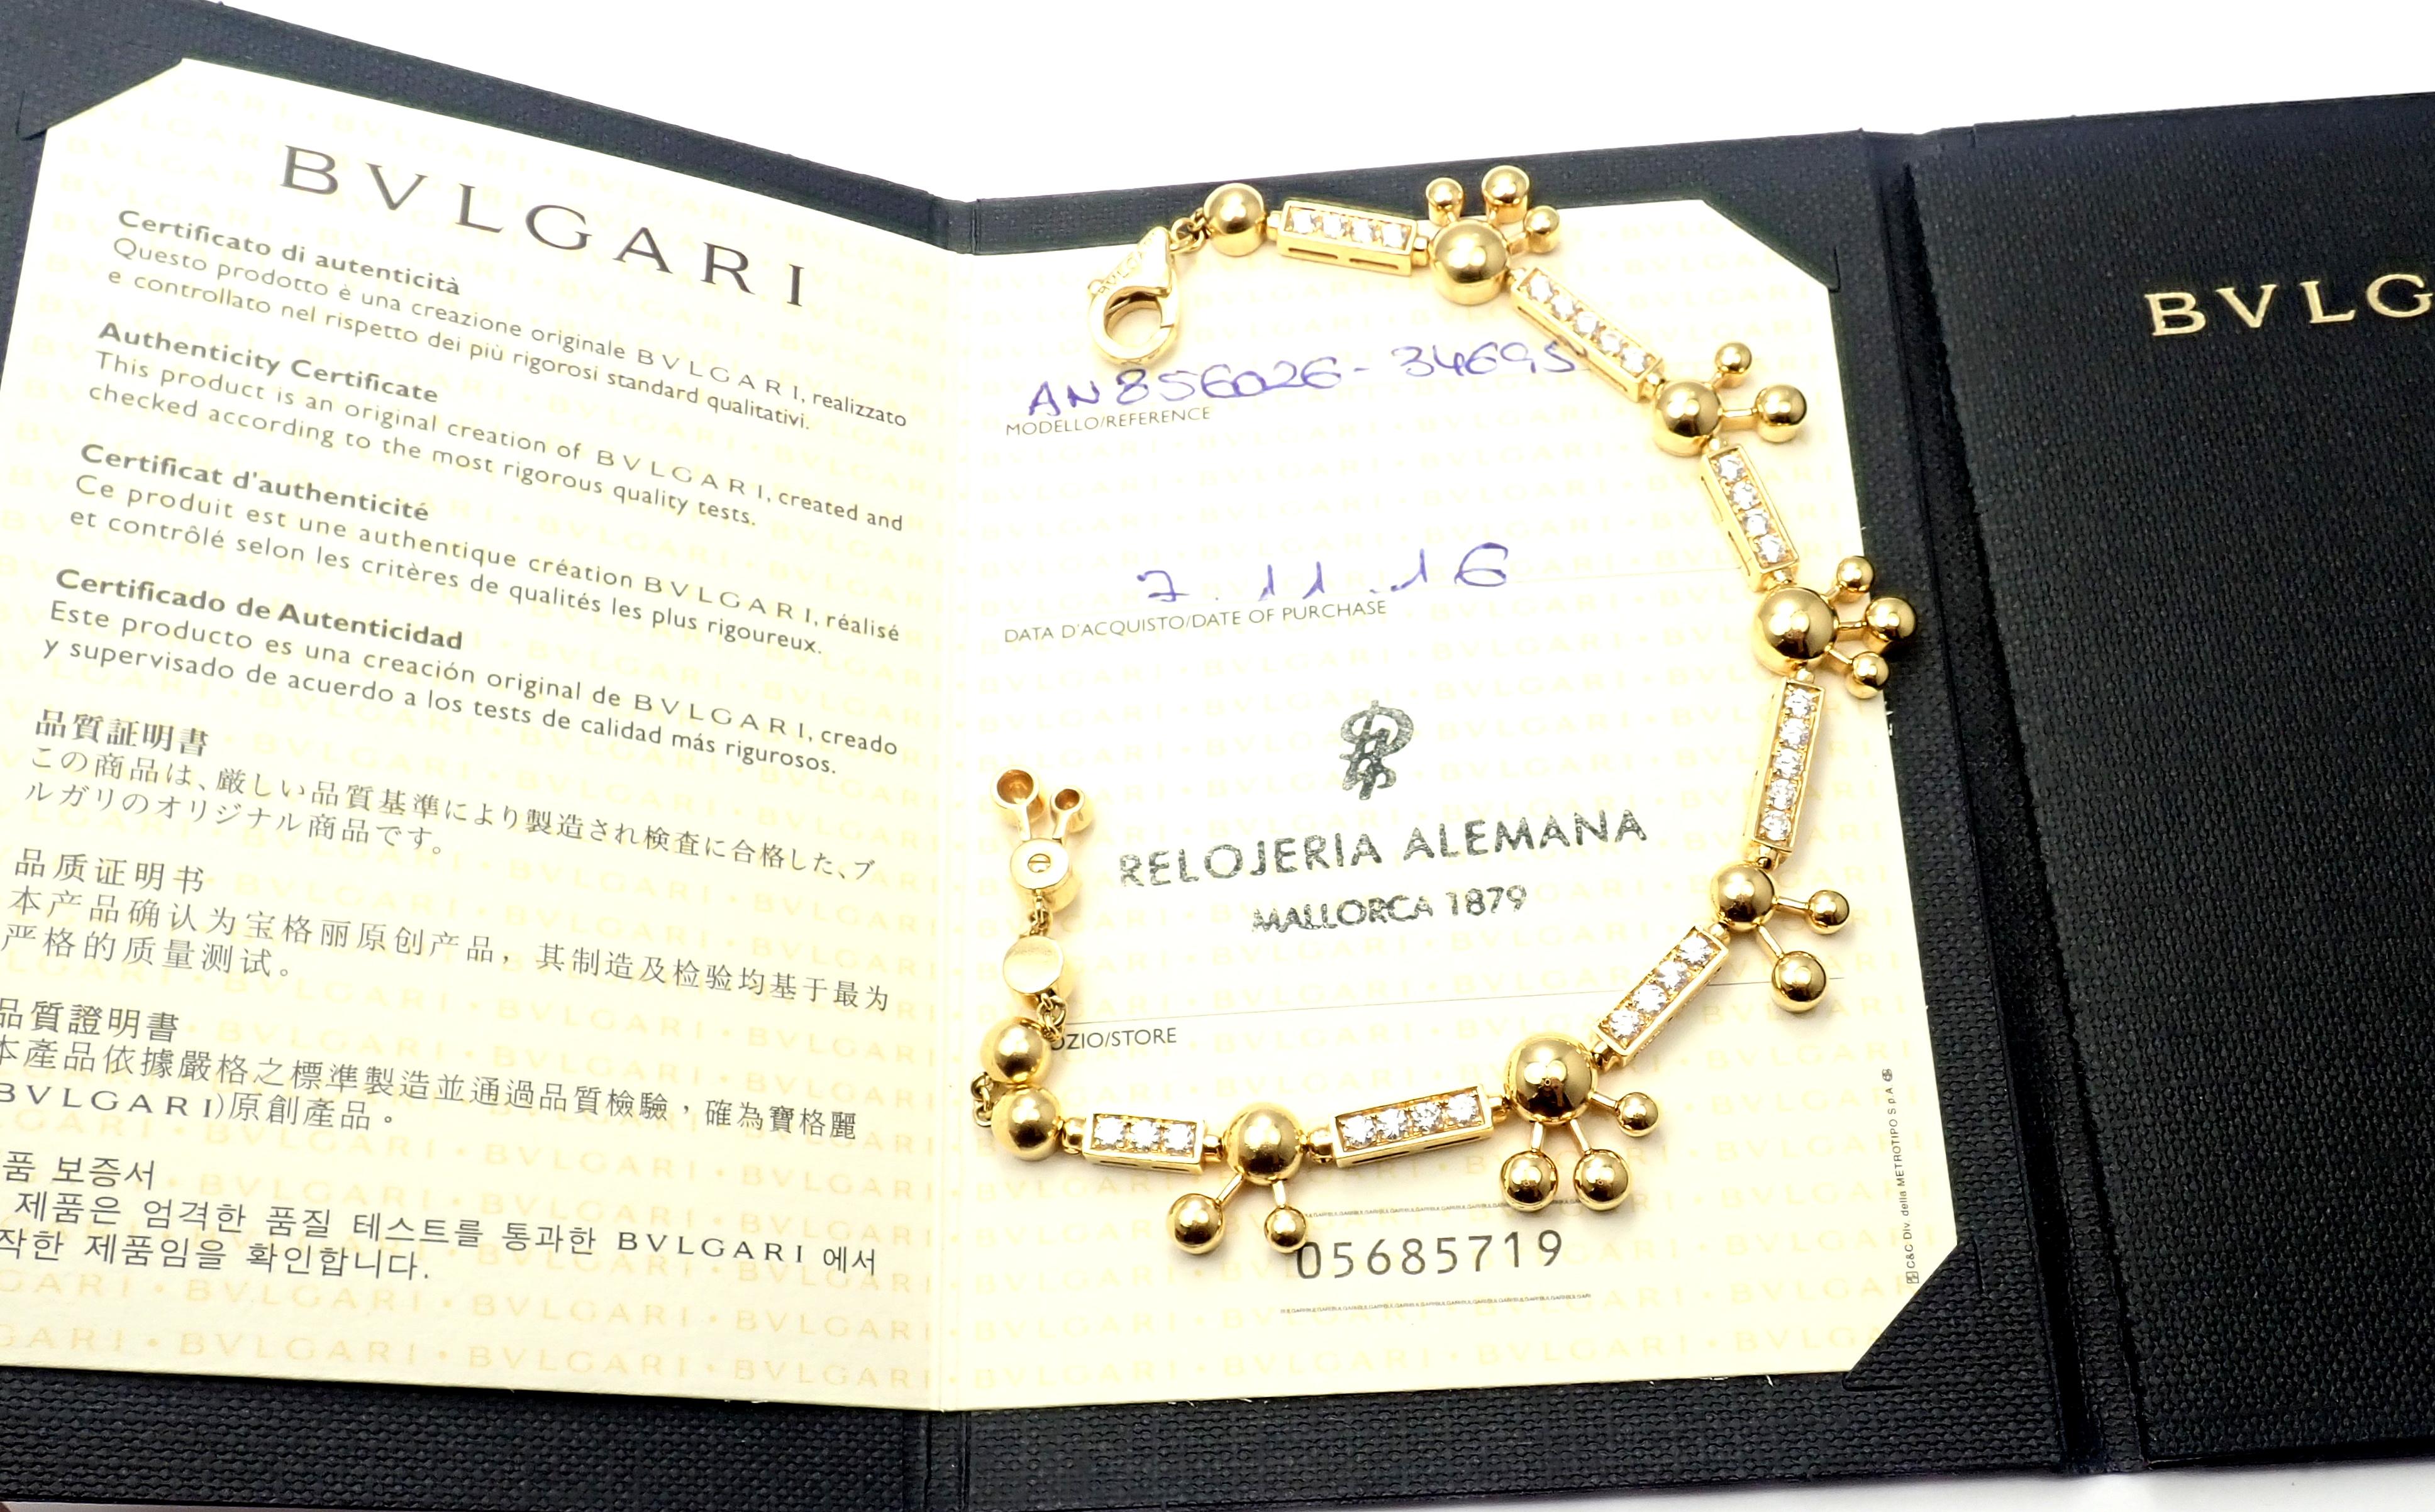 18k Yellow Gold Diamond Astrale Link Bracelet by Bulgari. 
With 26 round brilliant cut diamonds color E clarity VVS-VS total weight approx. 1.50ct
This bracelet comes with Bulgari certificate.
Details: 
Weight: 30.4 grams
Length:from 7 3/4